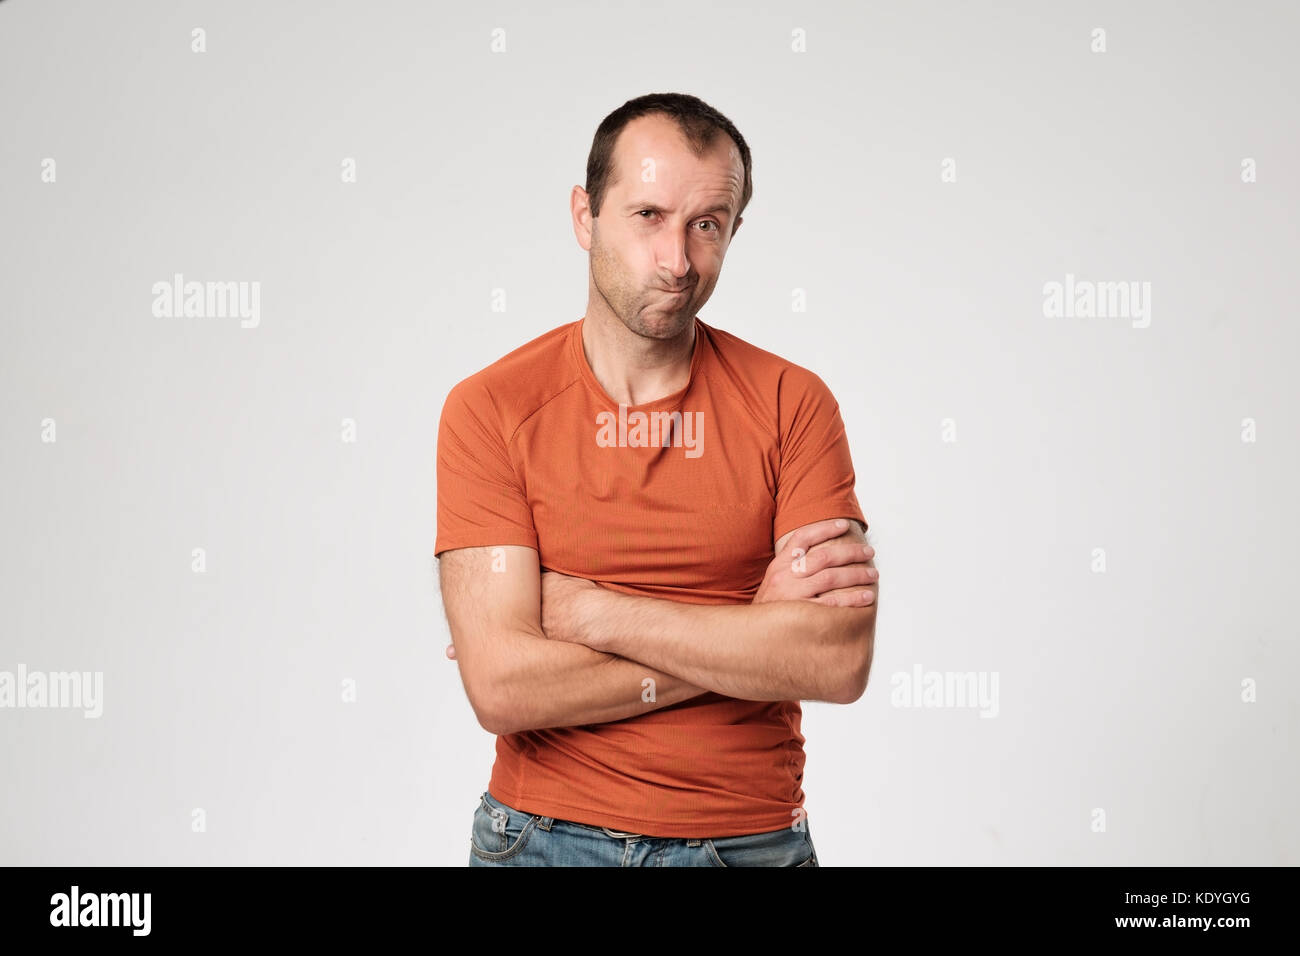 Isolated portrait of angry man wearing orange t-shirt holding arms crossed, having skeptical and dissatisfied look. Stock Photo